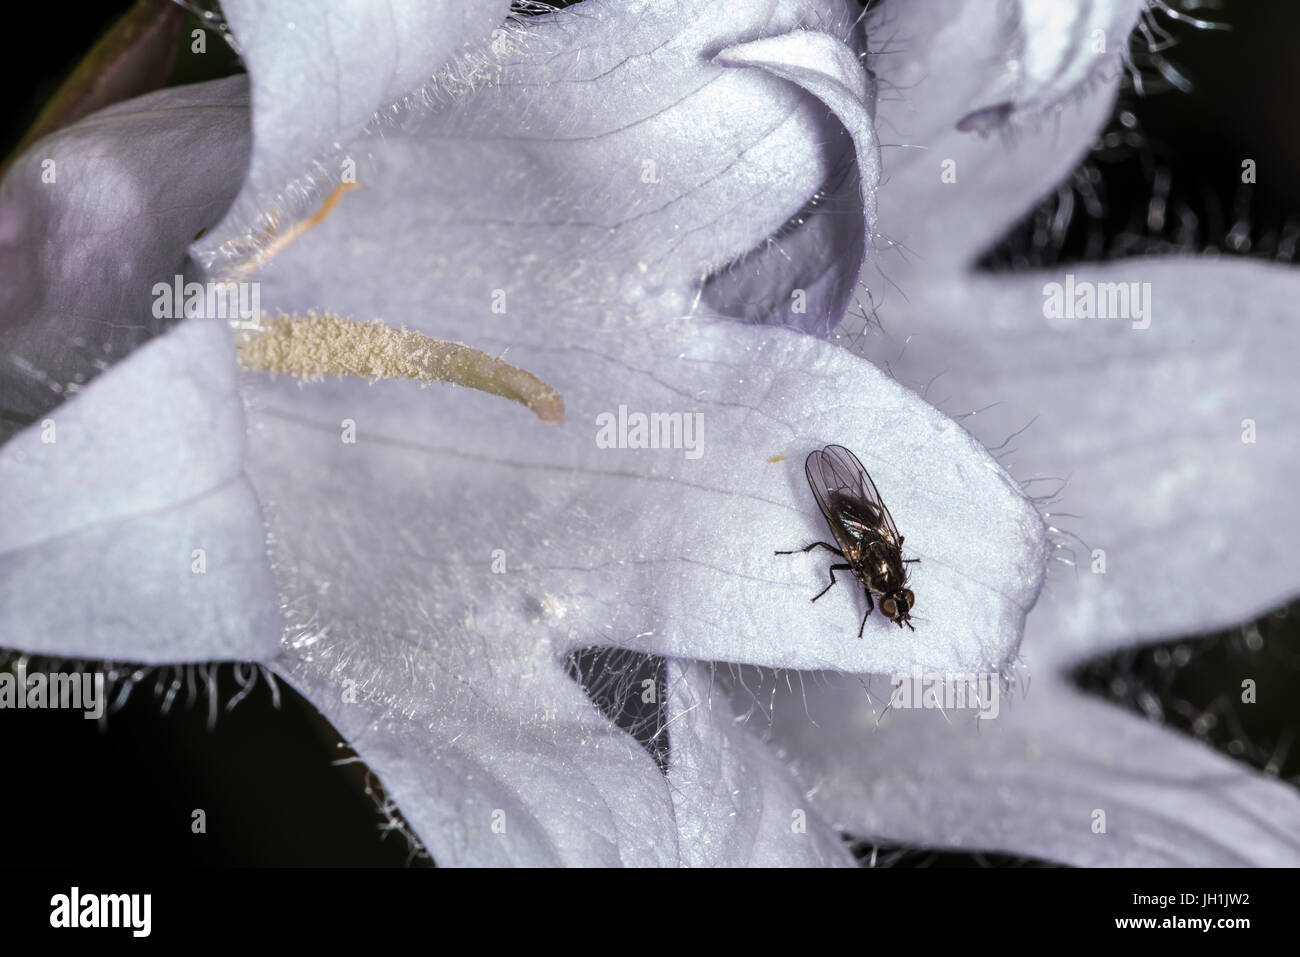 Close up image of fly resting on petal of white Campanula bell flower Stock Photo